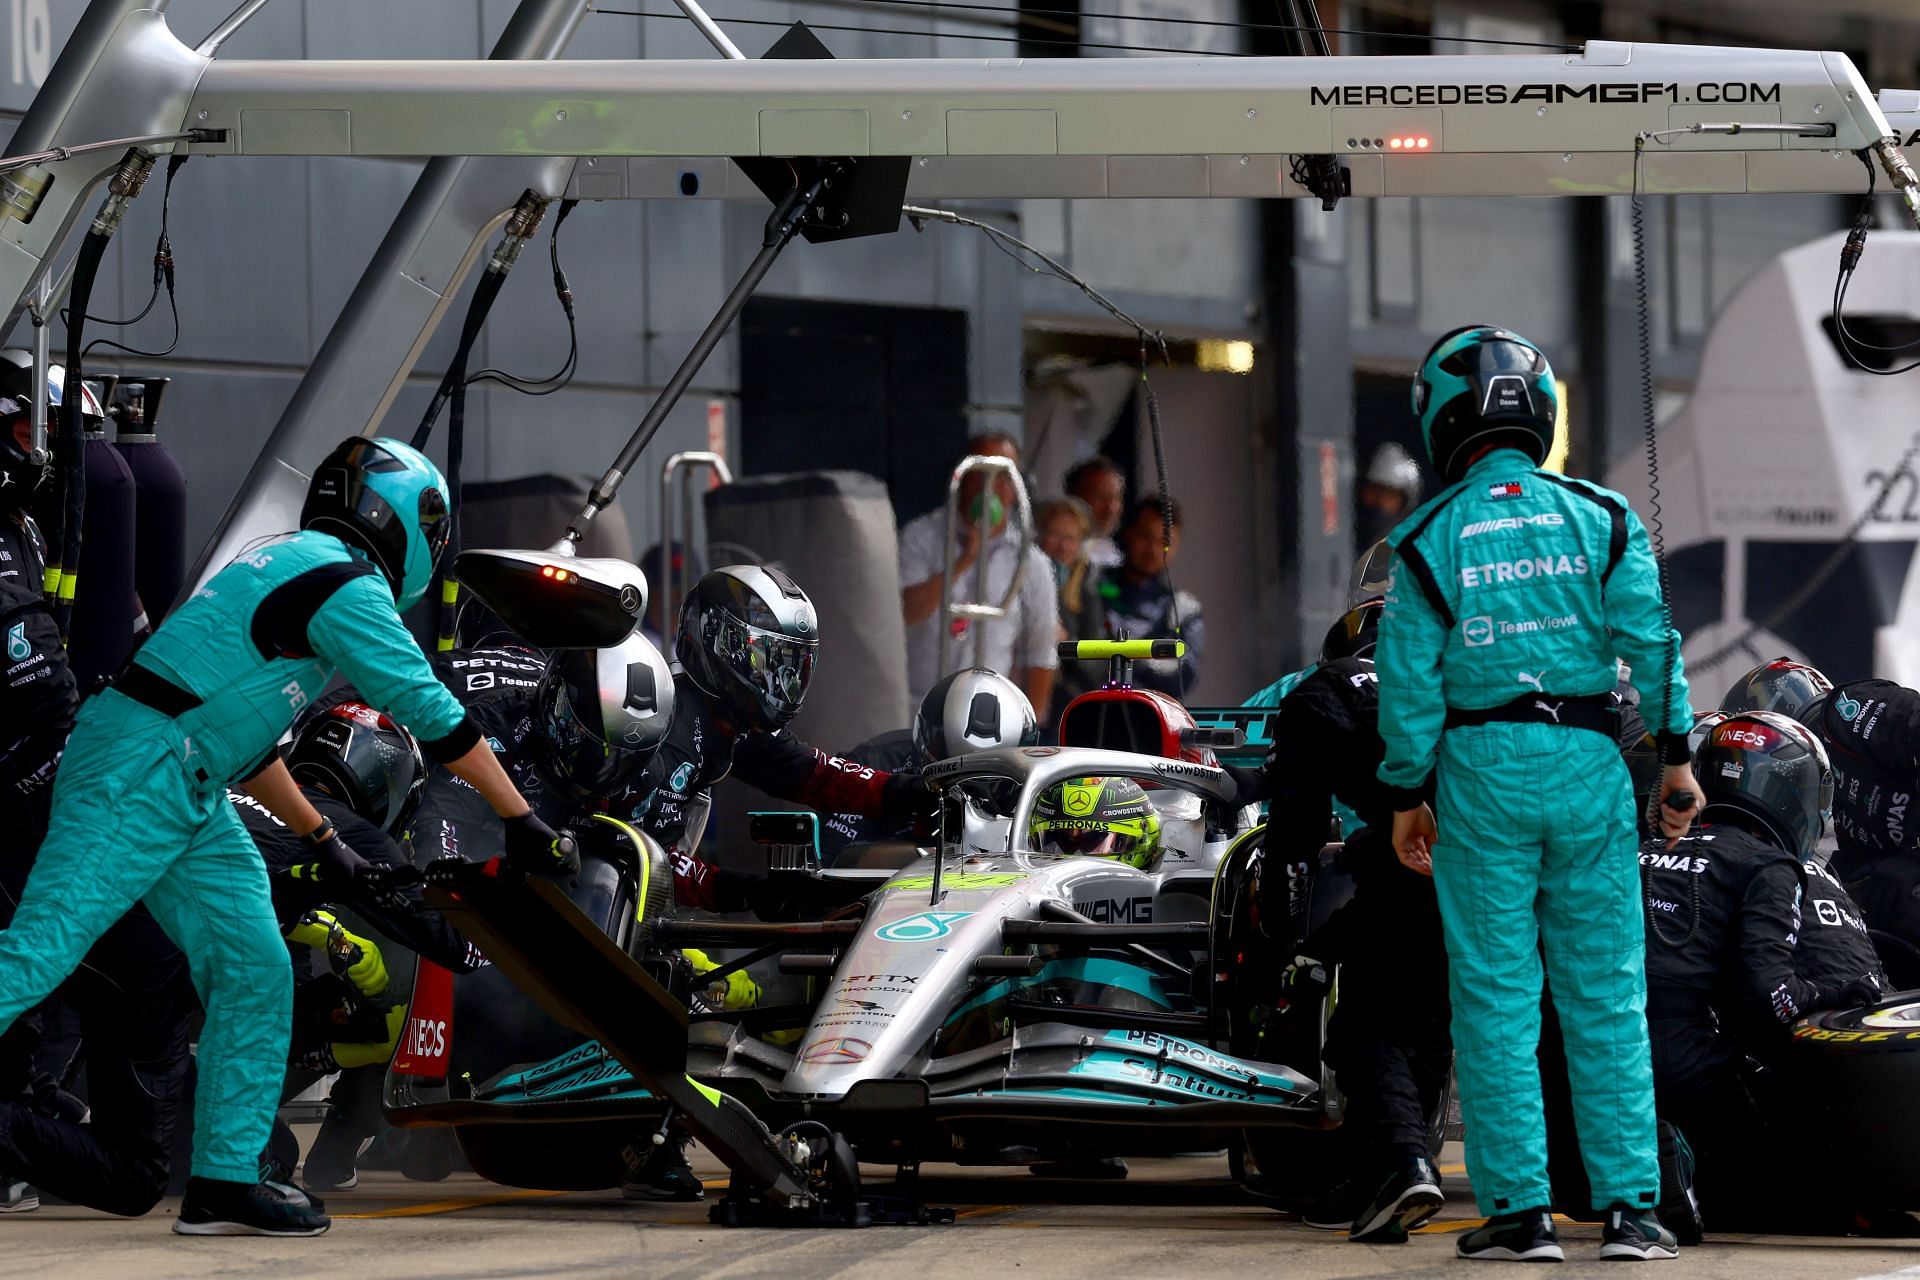 Lewis Hamilton (44) pits for hard tires on Lap 33 of the 2022 British GP.